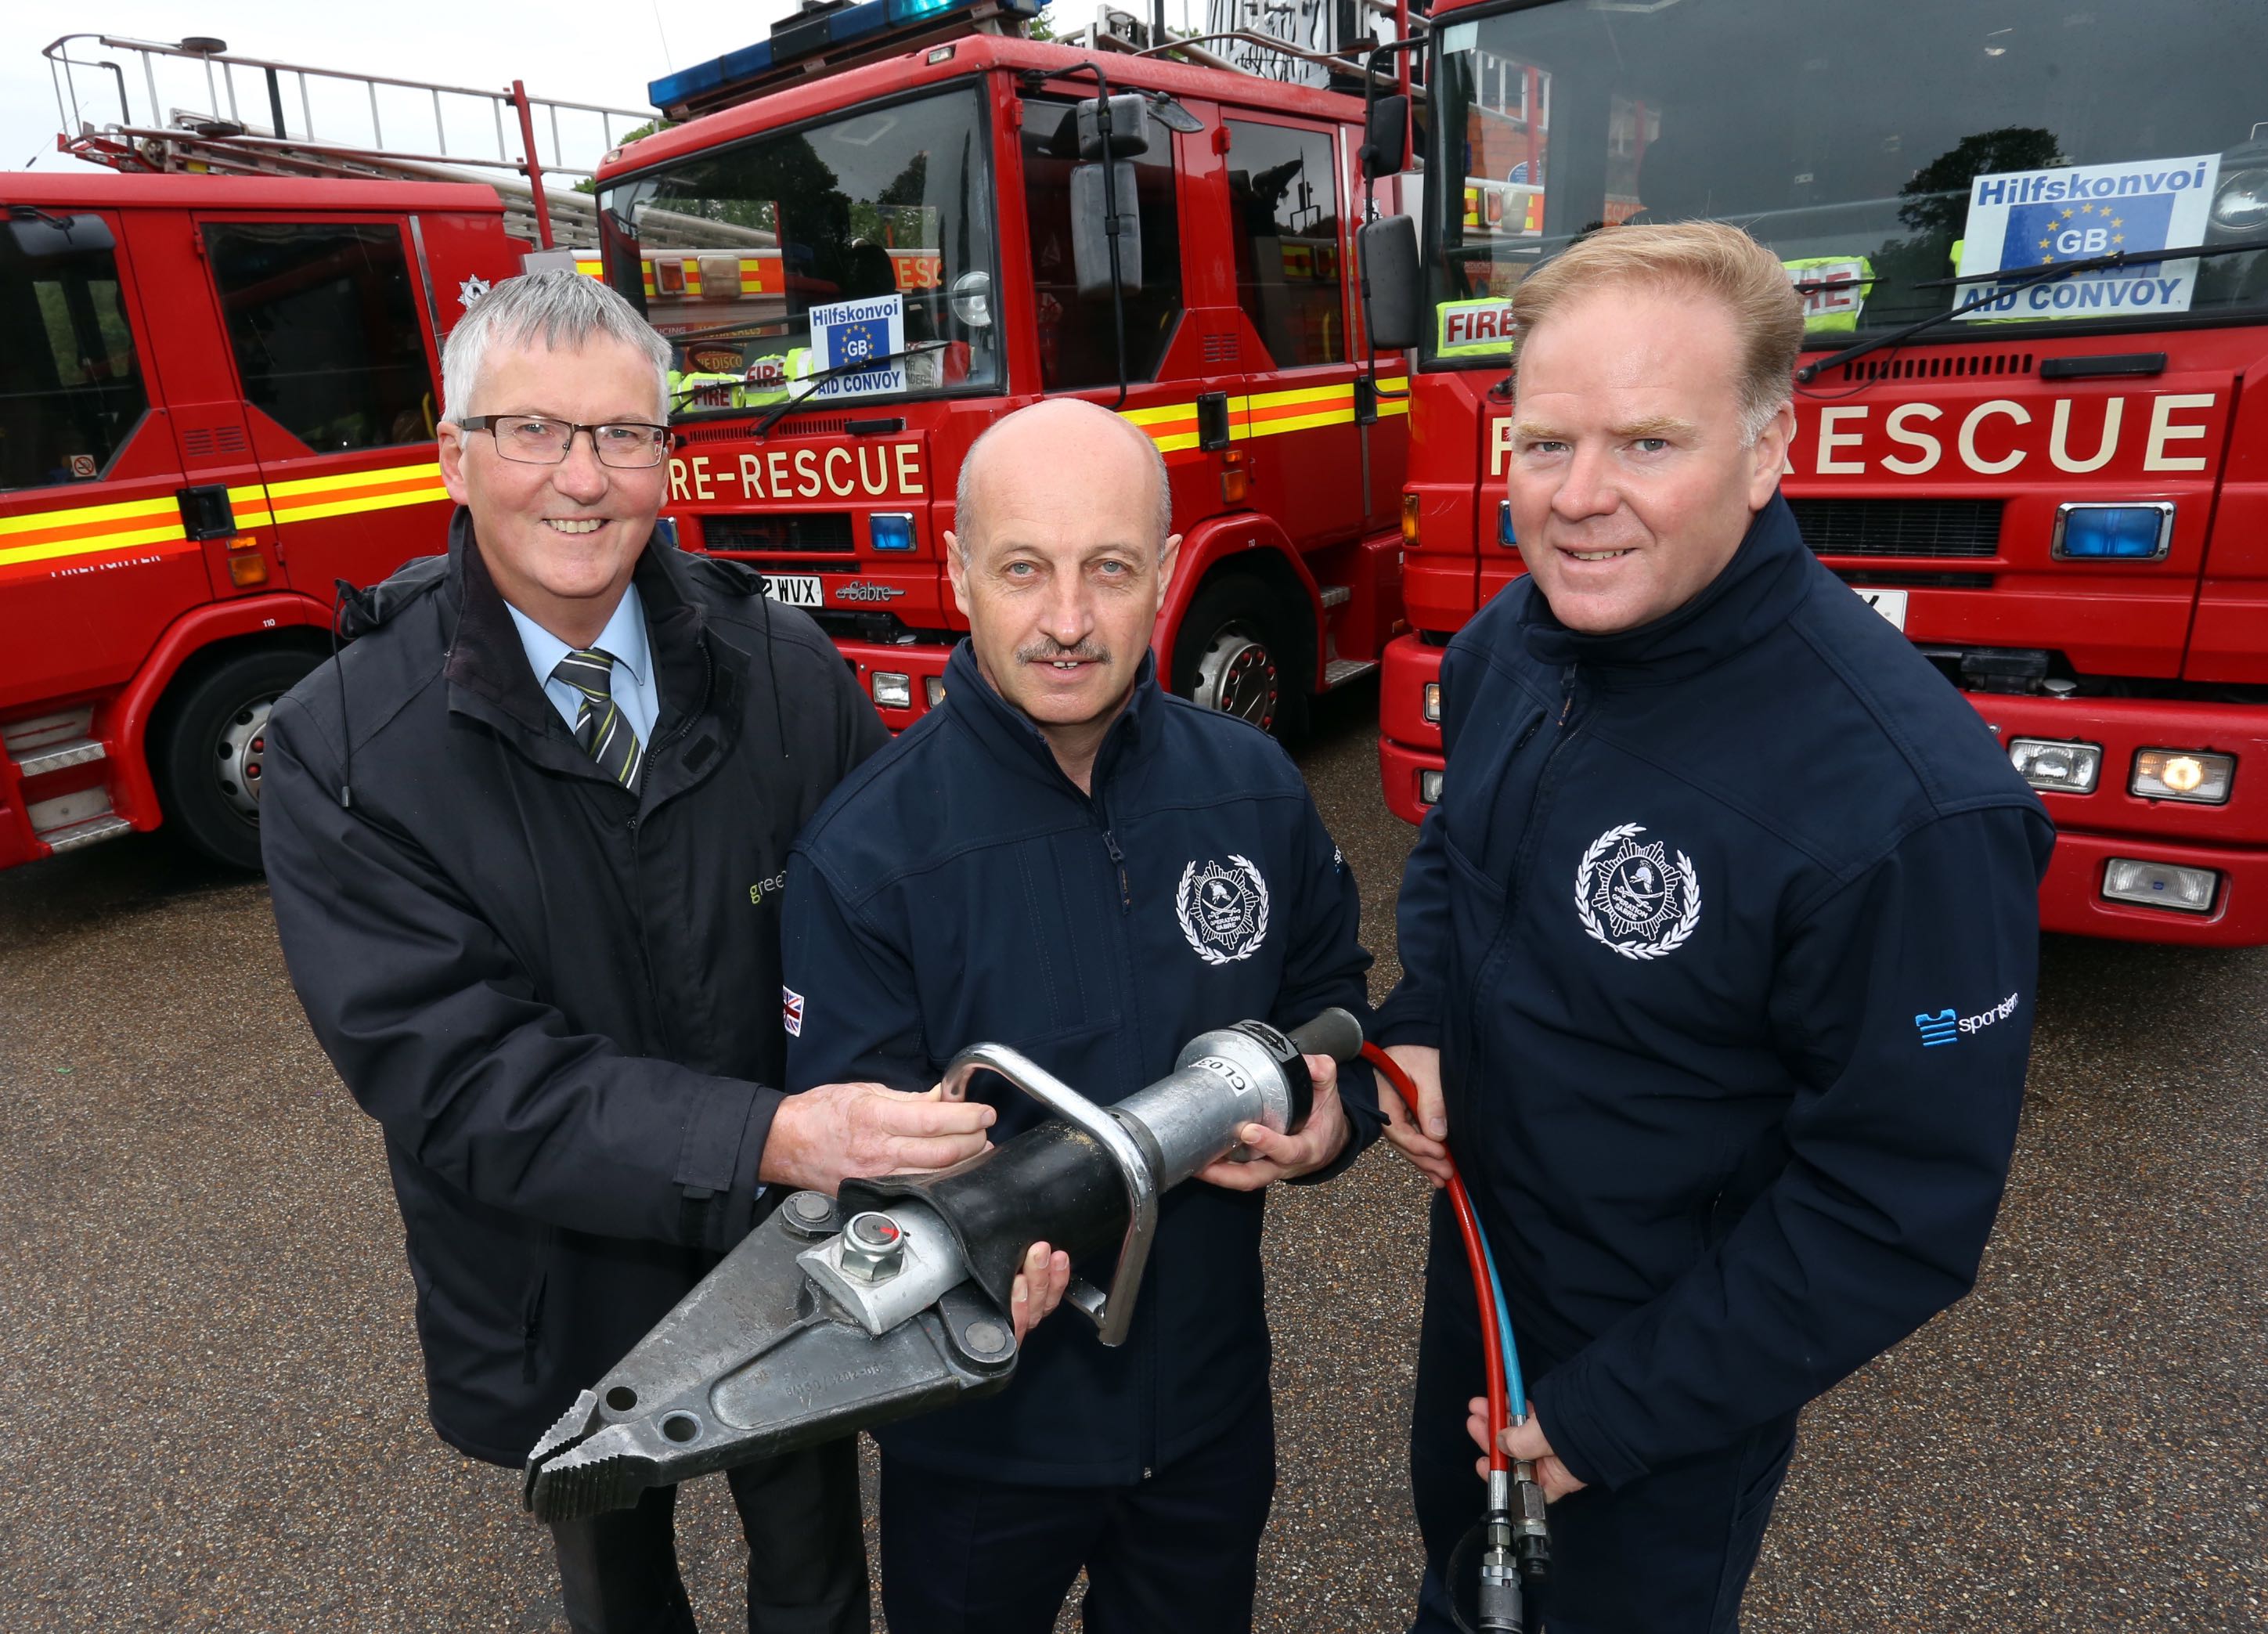 Martin James, (left) of Greenhous, Shrewsbury presents Steve Worrall, with the cutting equipment, pictured with Malcolm Price, a retired firefighter and former member of Shropshire and Wrekin Fire Authority.